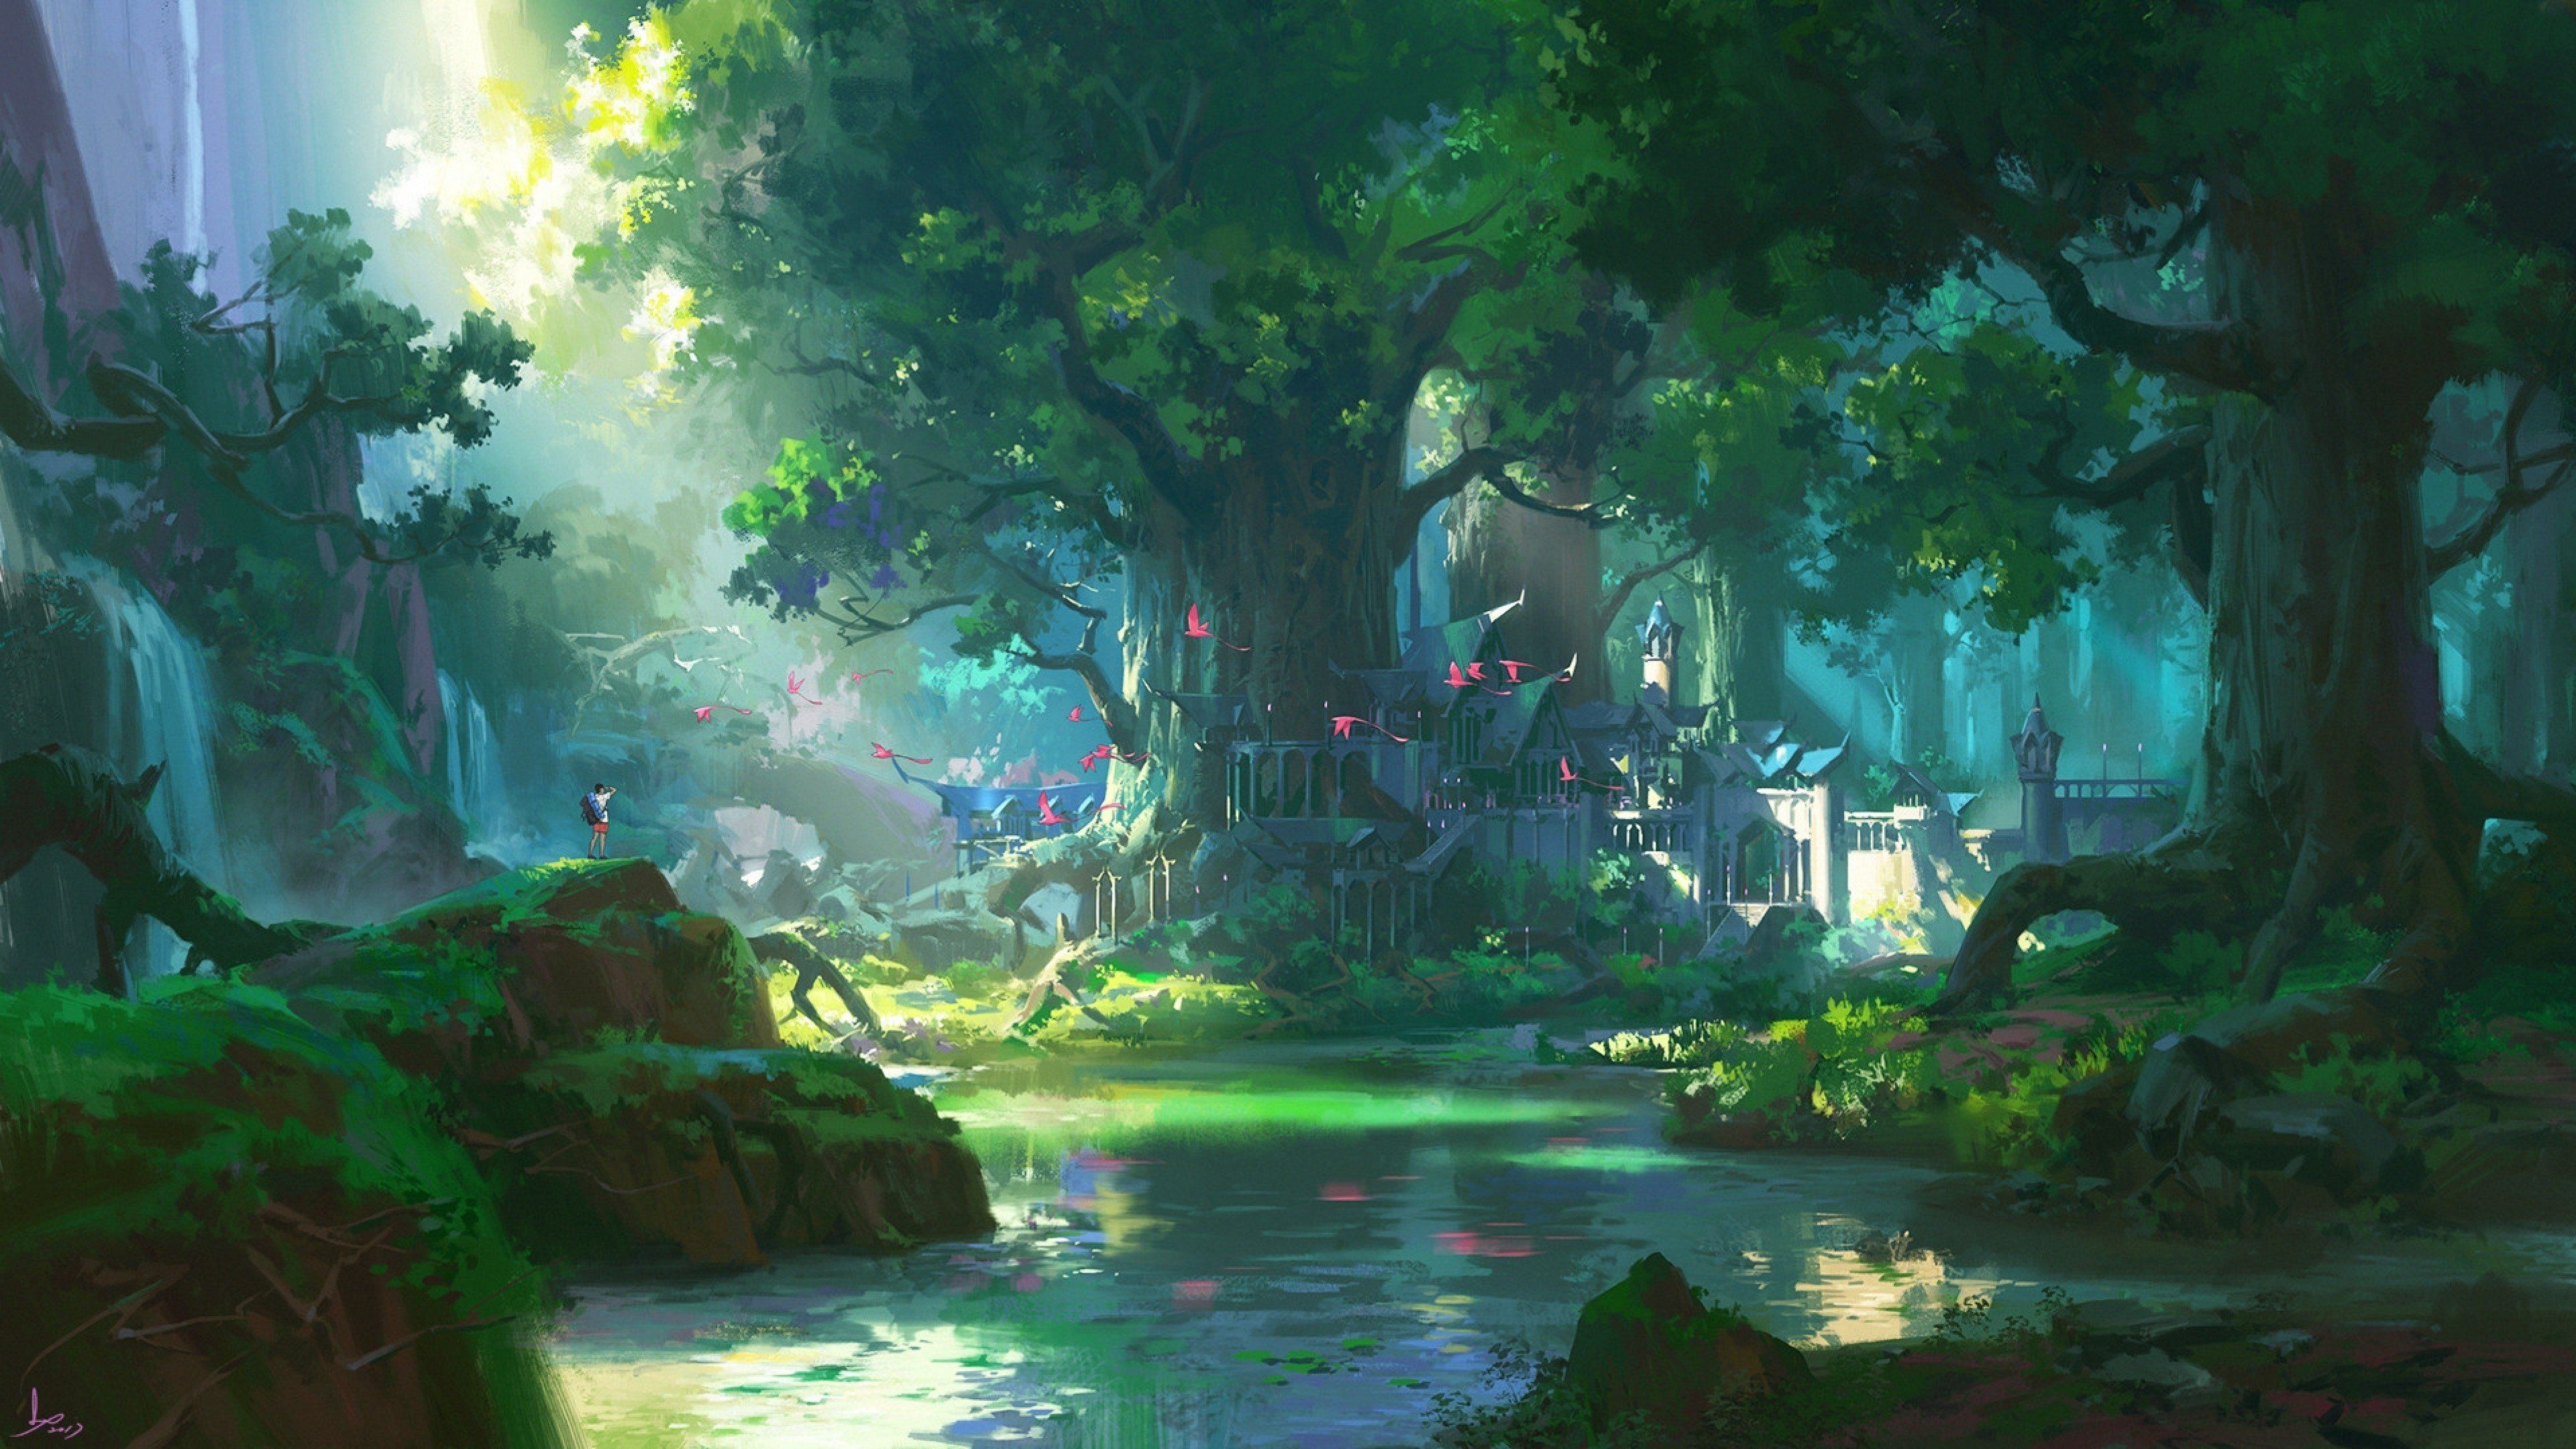 Aesthetic anime rain forest wallpapers